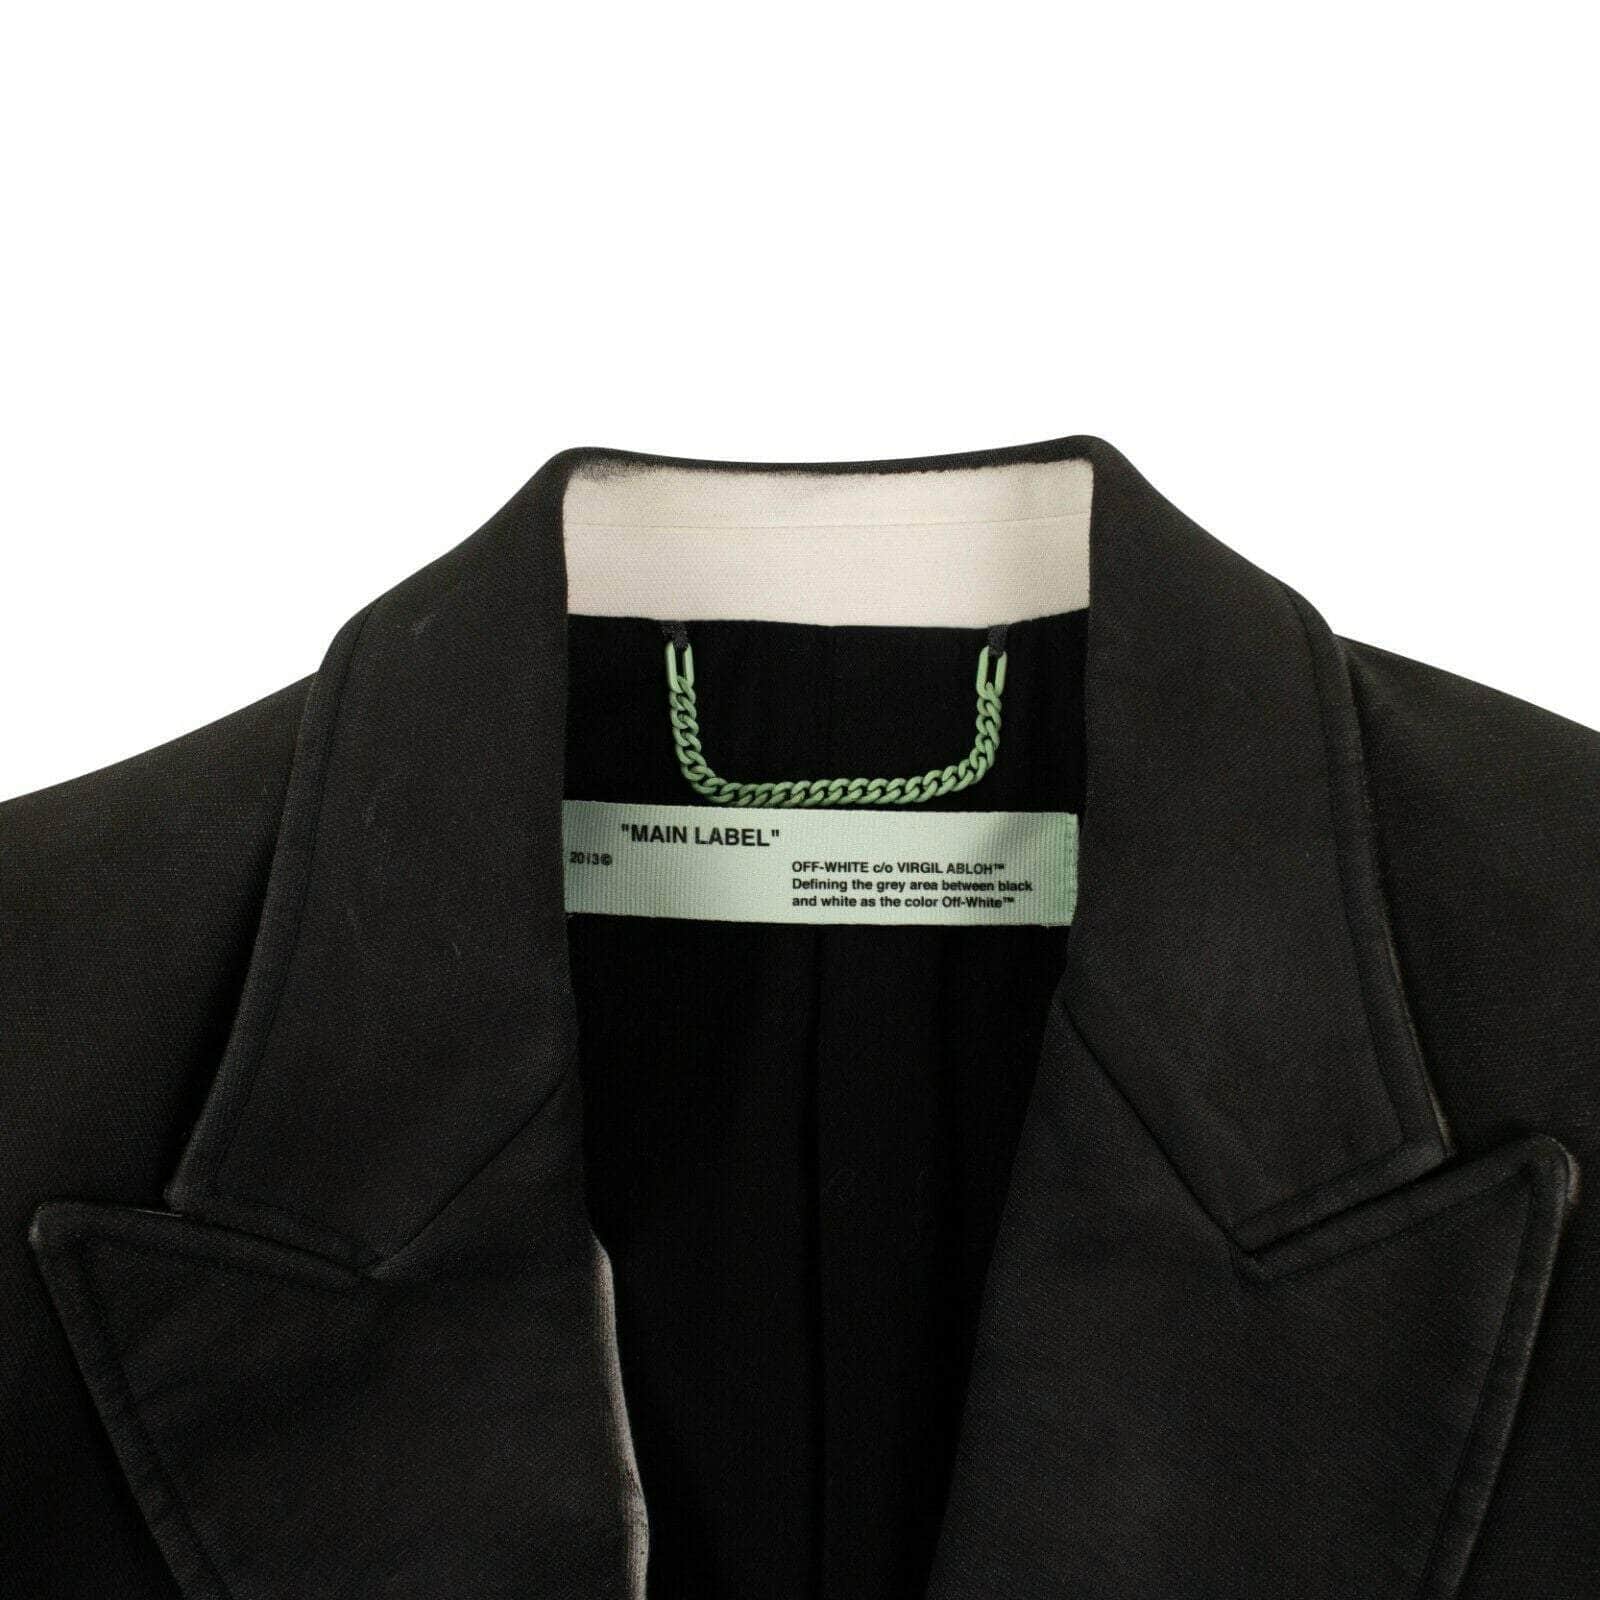 Off-White c/o Virgil Abloh Men's Blazers & Sport Coats 48 Paint Double Breasted Blazer - Black JF6-OW-1/48 JF6-OW-1/48